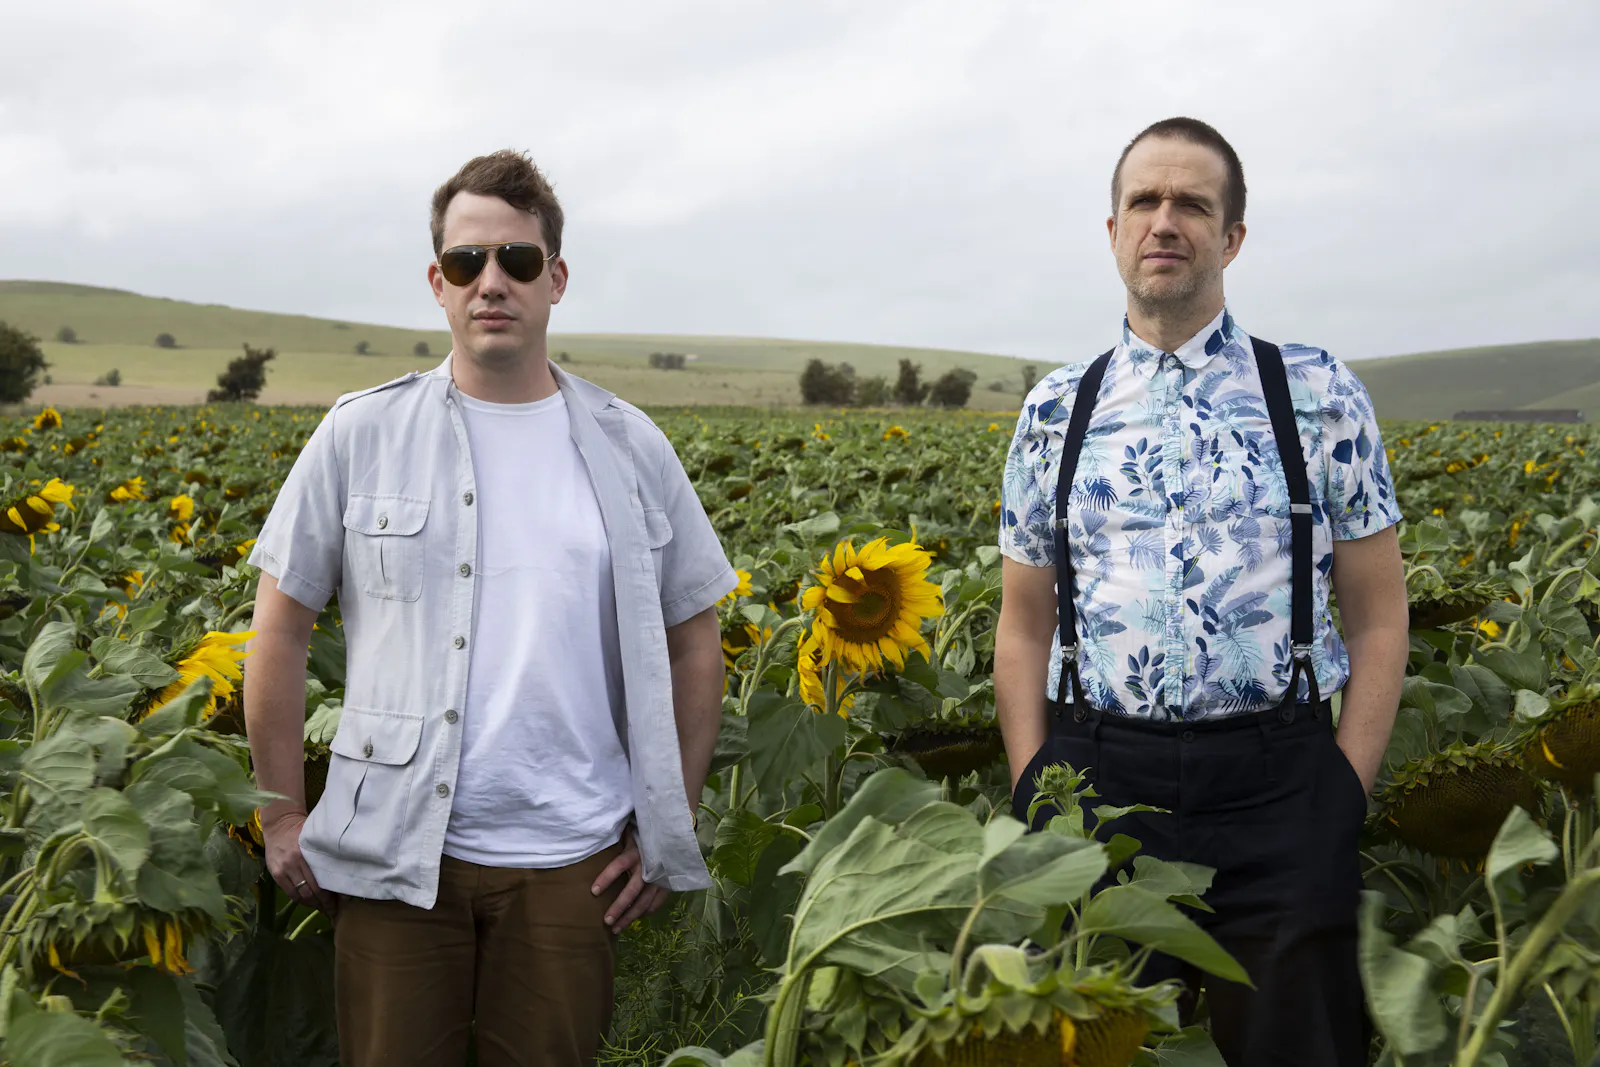 The Quietus cofounders Luke Turner and John Doran stand in a field of sunflowers, looking ambivalent.